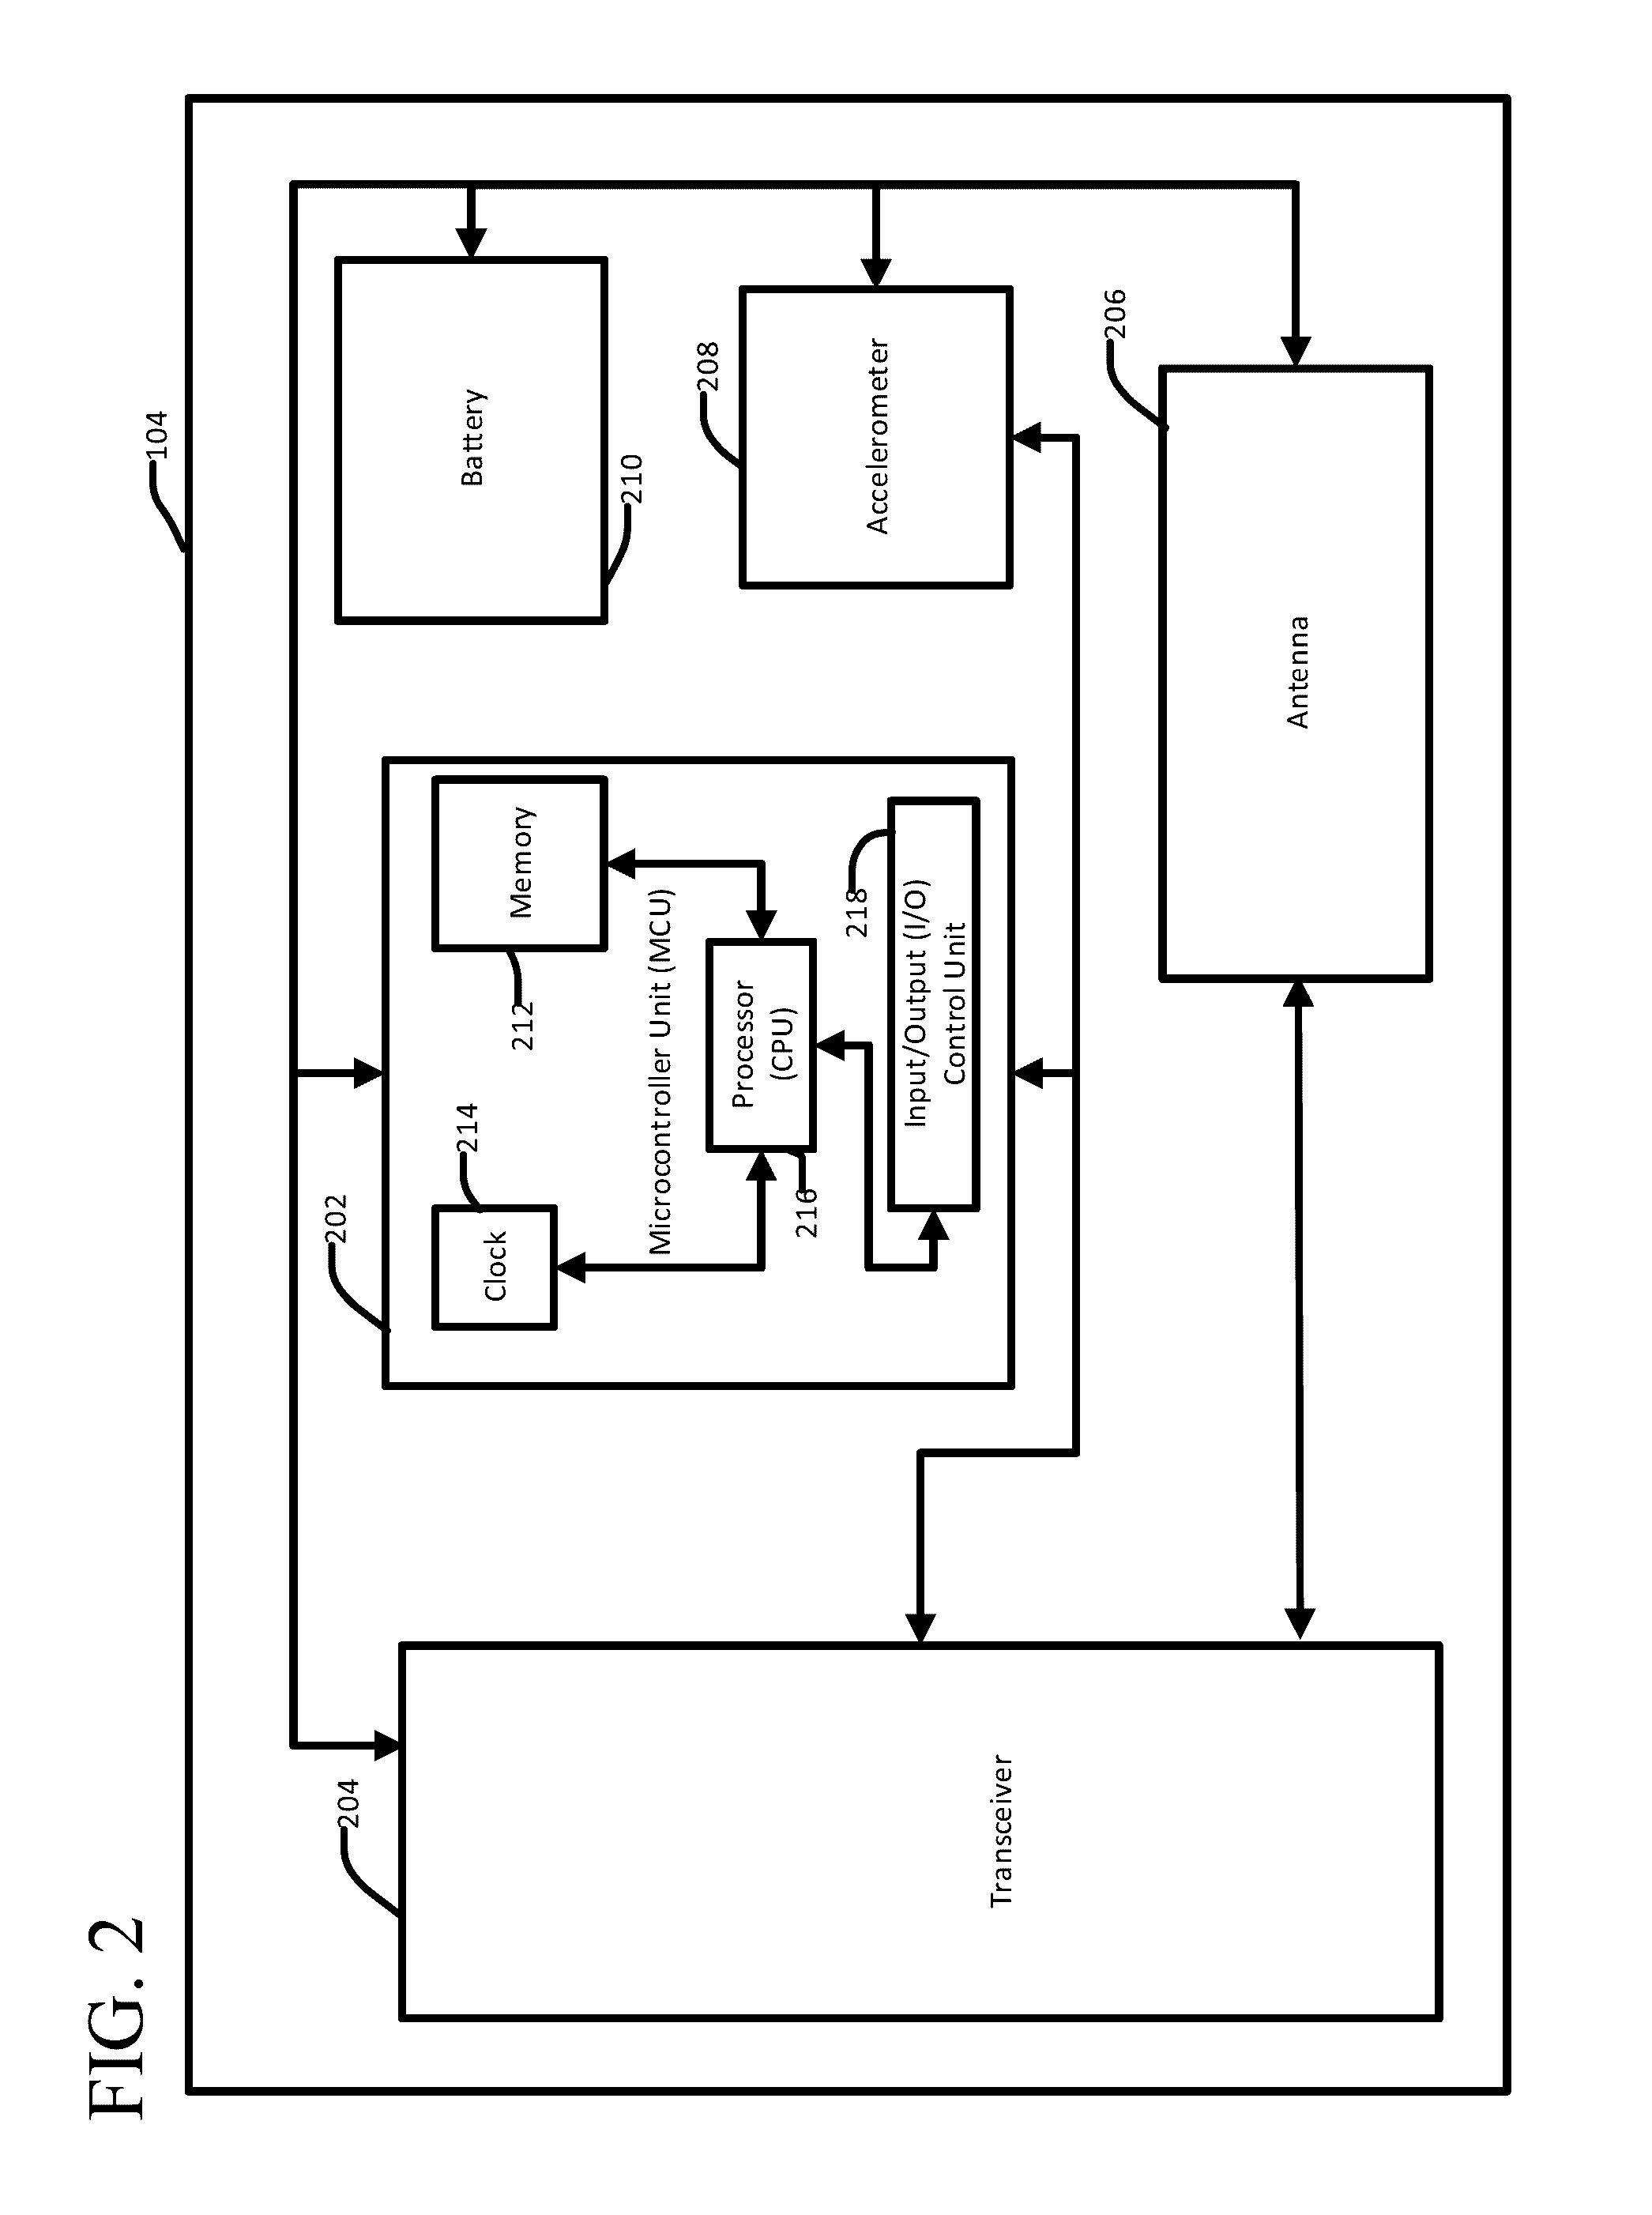 Method and system for state-based power management of asset tracking systems for non-statutory assets